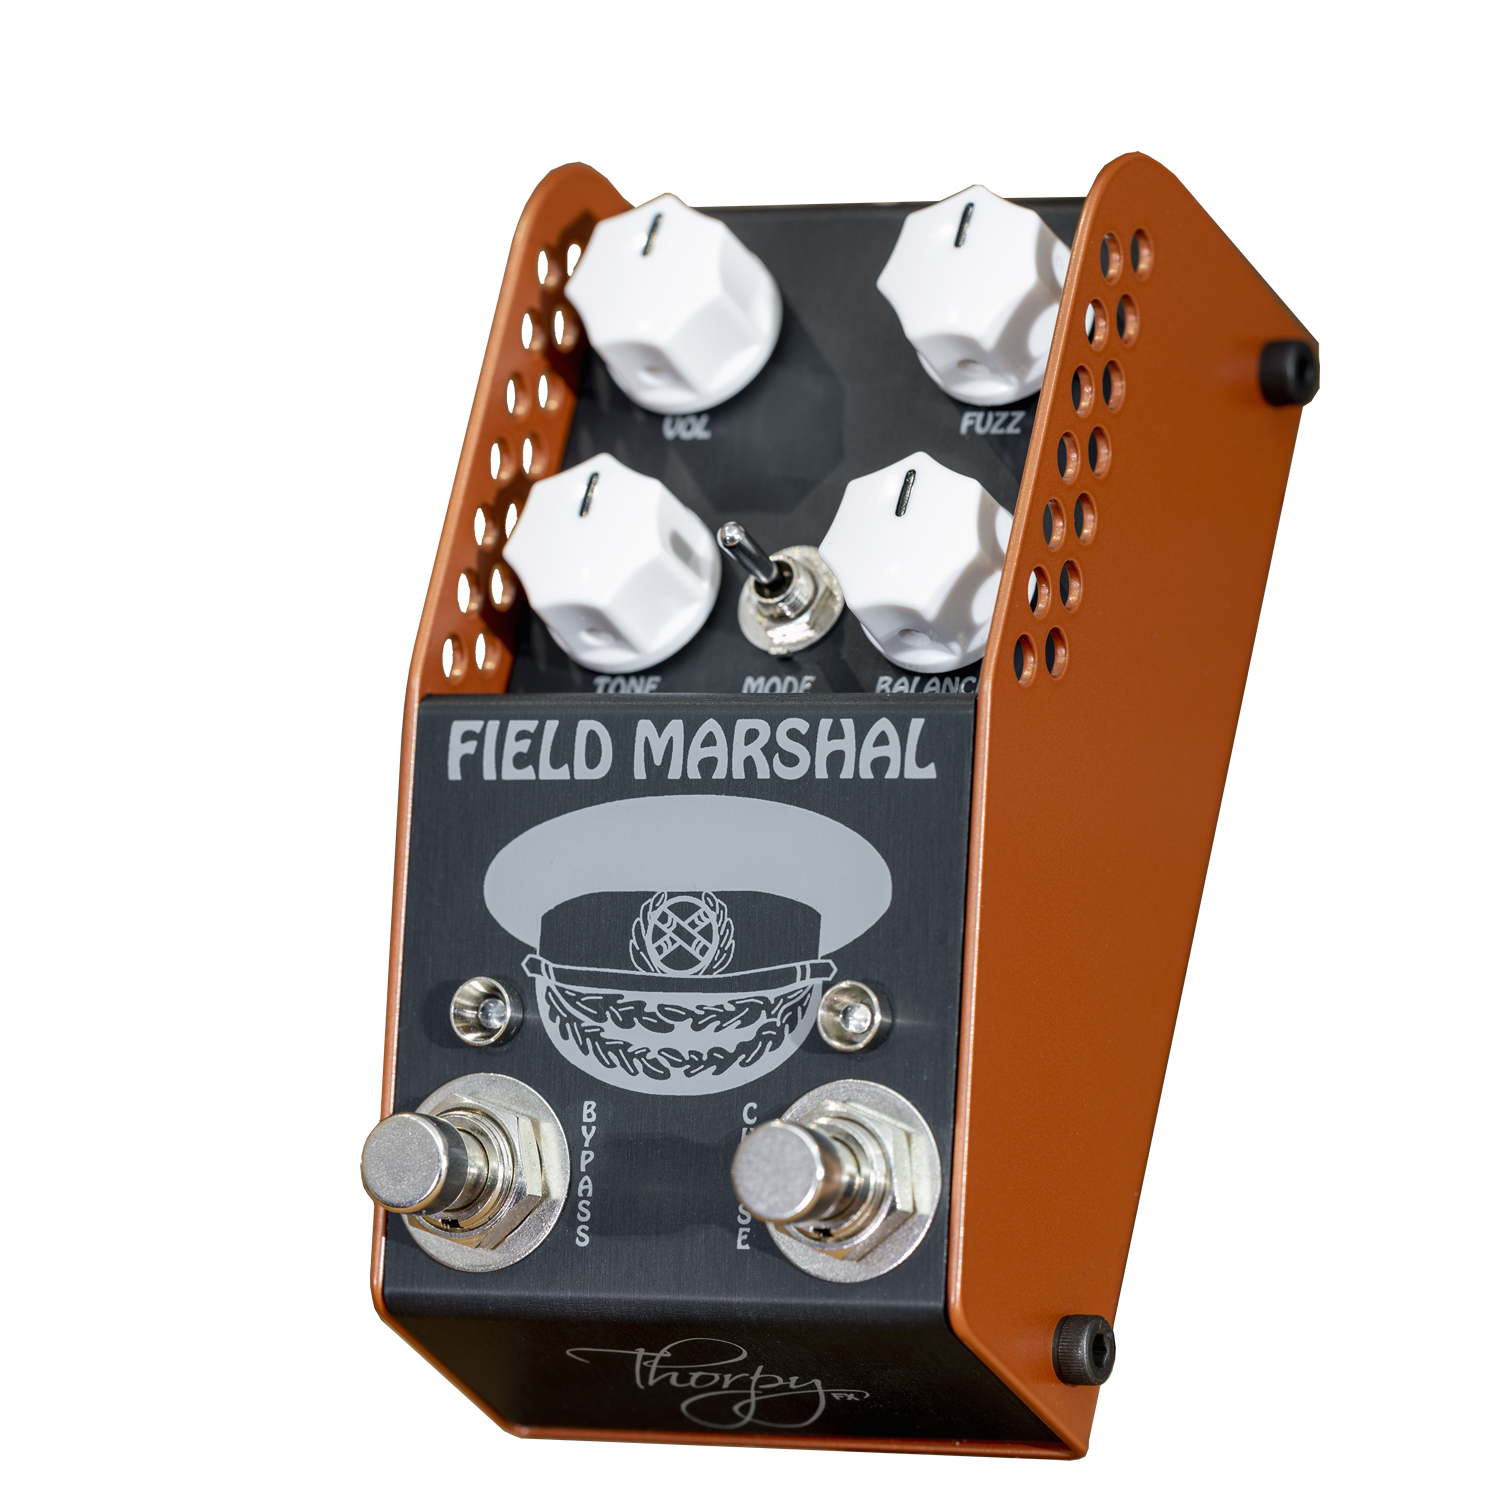 ThorpyFX Field Marshall Fuzz Guitar Effects Pedal